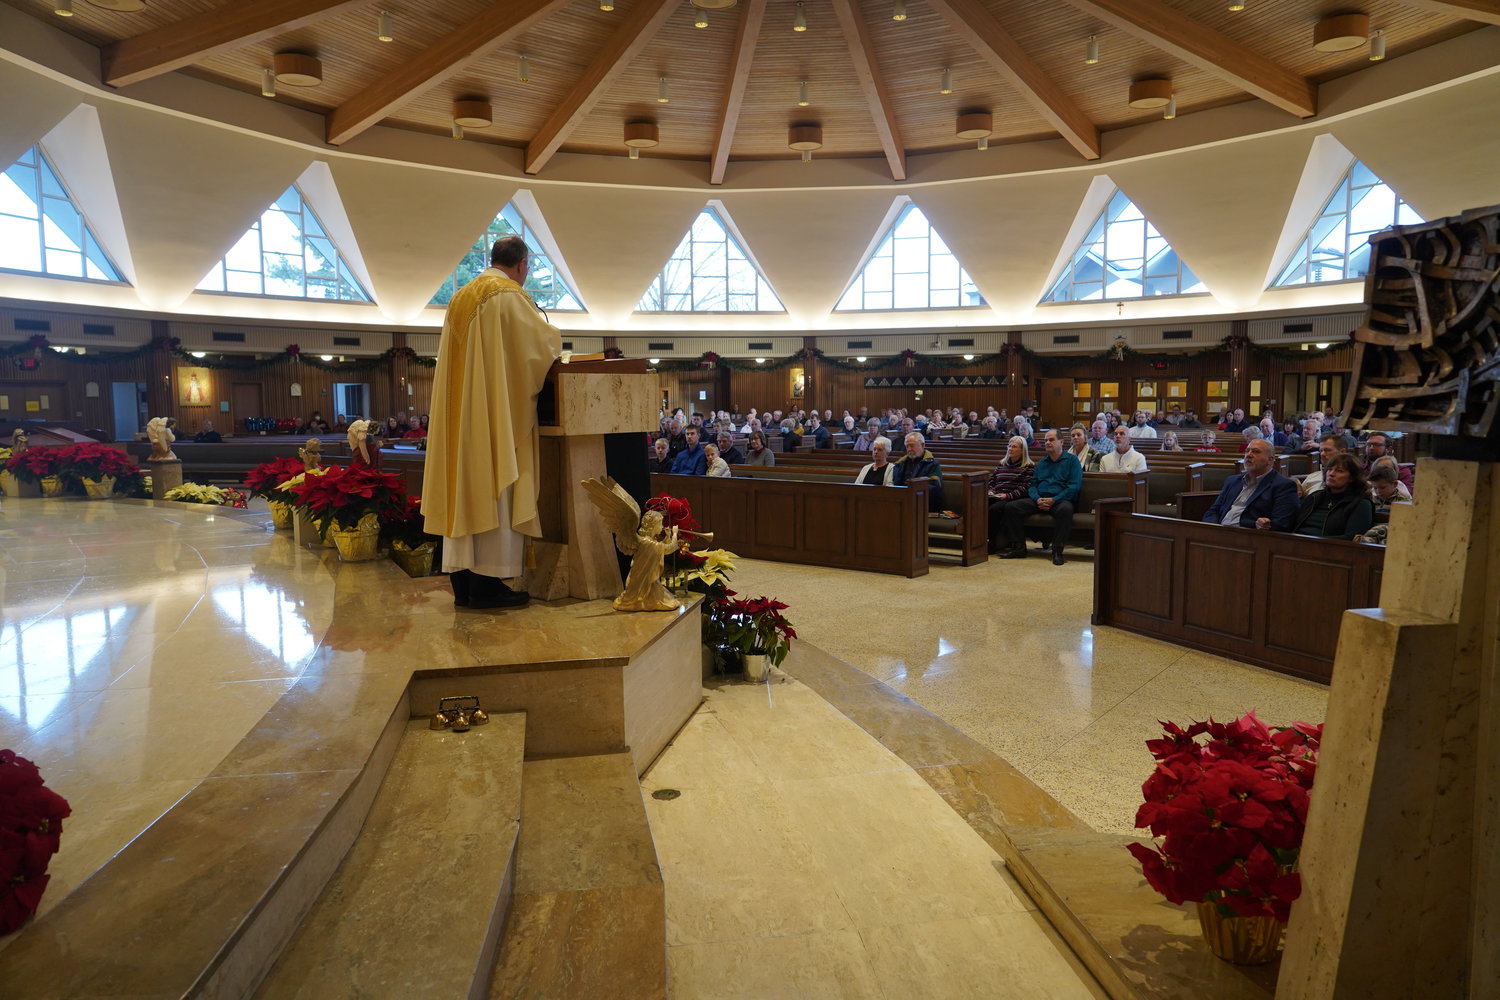 Photos taken the weekend of the Feast of the Baptism of the Lord show the vastness of the interior of the Cathedral of St. Joseph in Jefferson City. Work has begun to update the 52-year-old Cathedral’s systems and utilities and make it more beautiful, more welcoming and more recognizably Catholic.